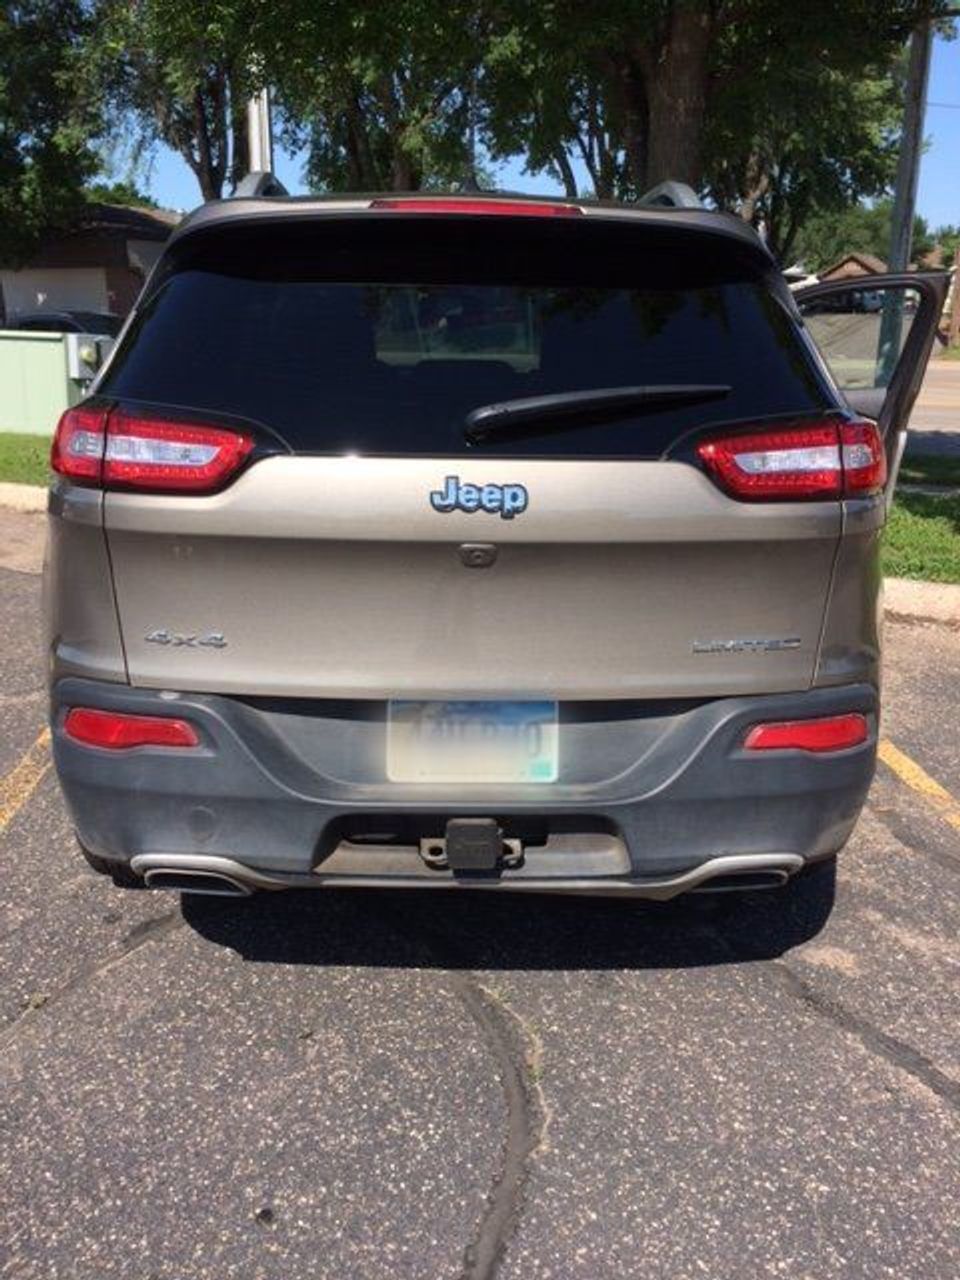 2017 Jeep Cherokee Limited | Sioux Falls, SD, Billet Silver Metallic Clear Coat (Silver), 4x4